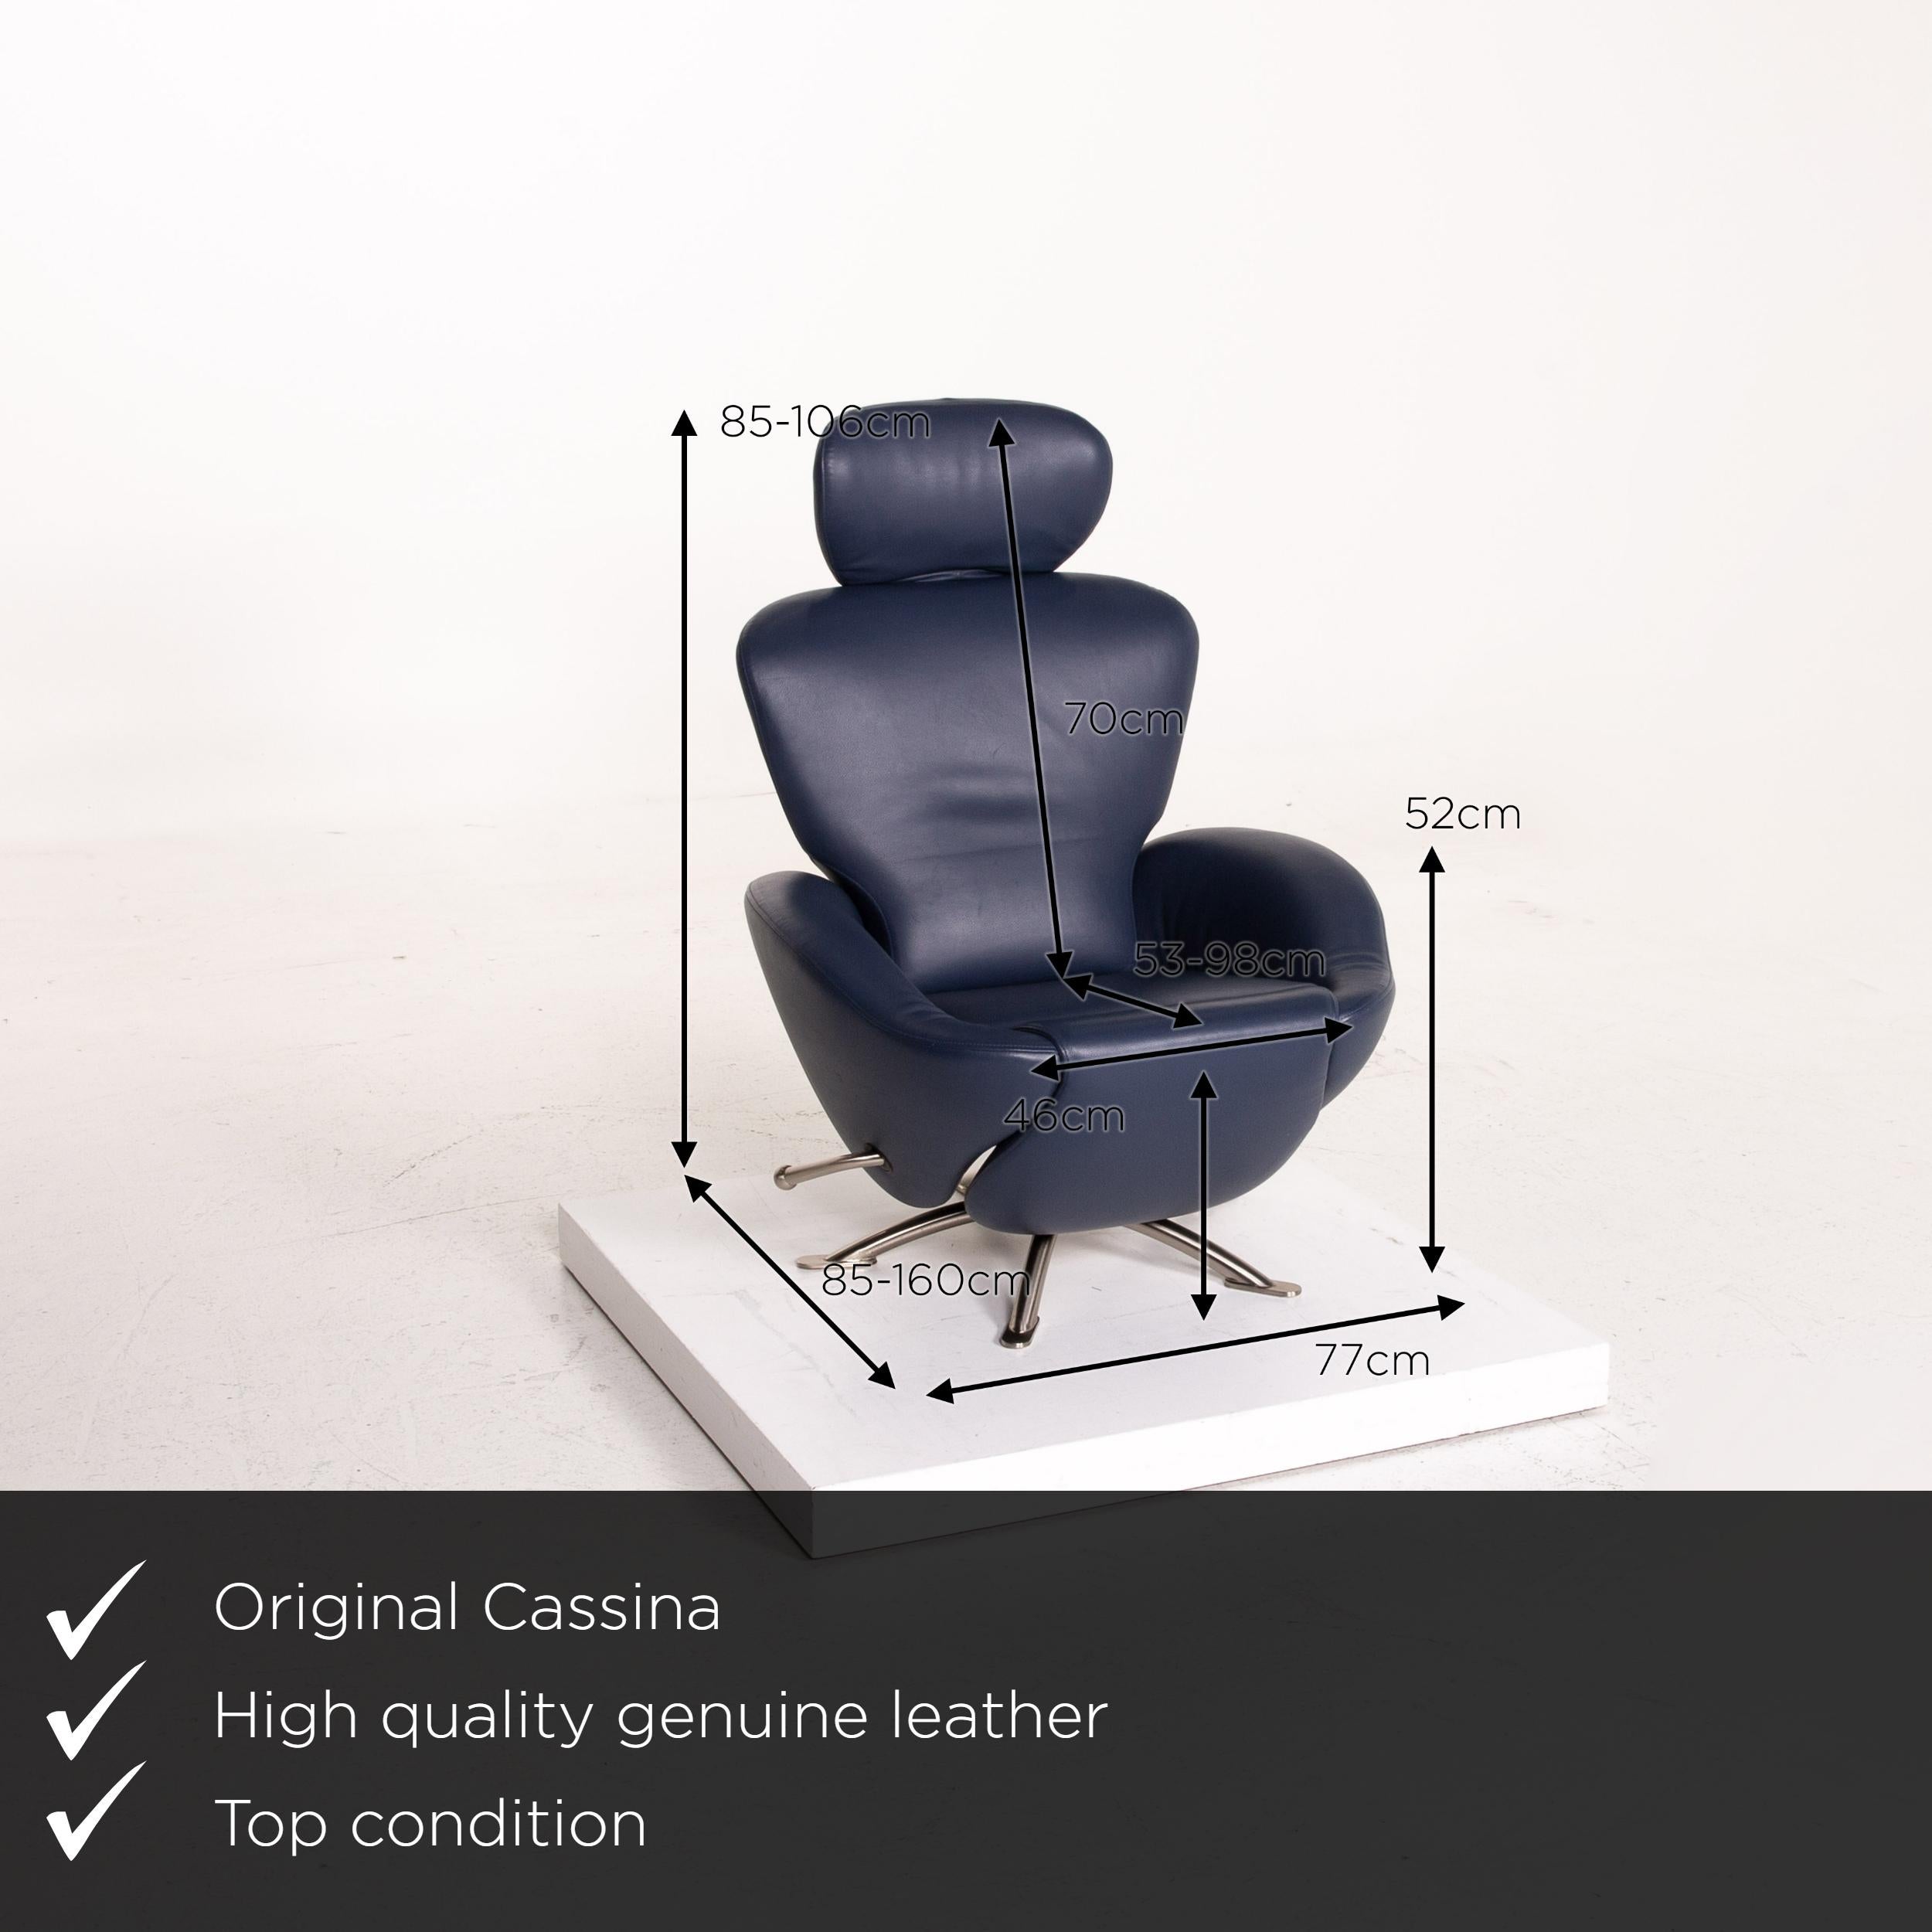 We present to you a Cassina Dodo leather armchair blue dark blue relaxation function.


 Product measurements in centimeters:
 

Depth 85
Width 77
Height 85
Seat height 42
Rest height 52
Seat depth 53
Seat width 46
Back height 70.
 